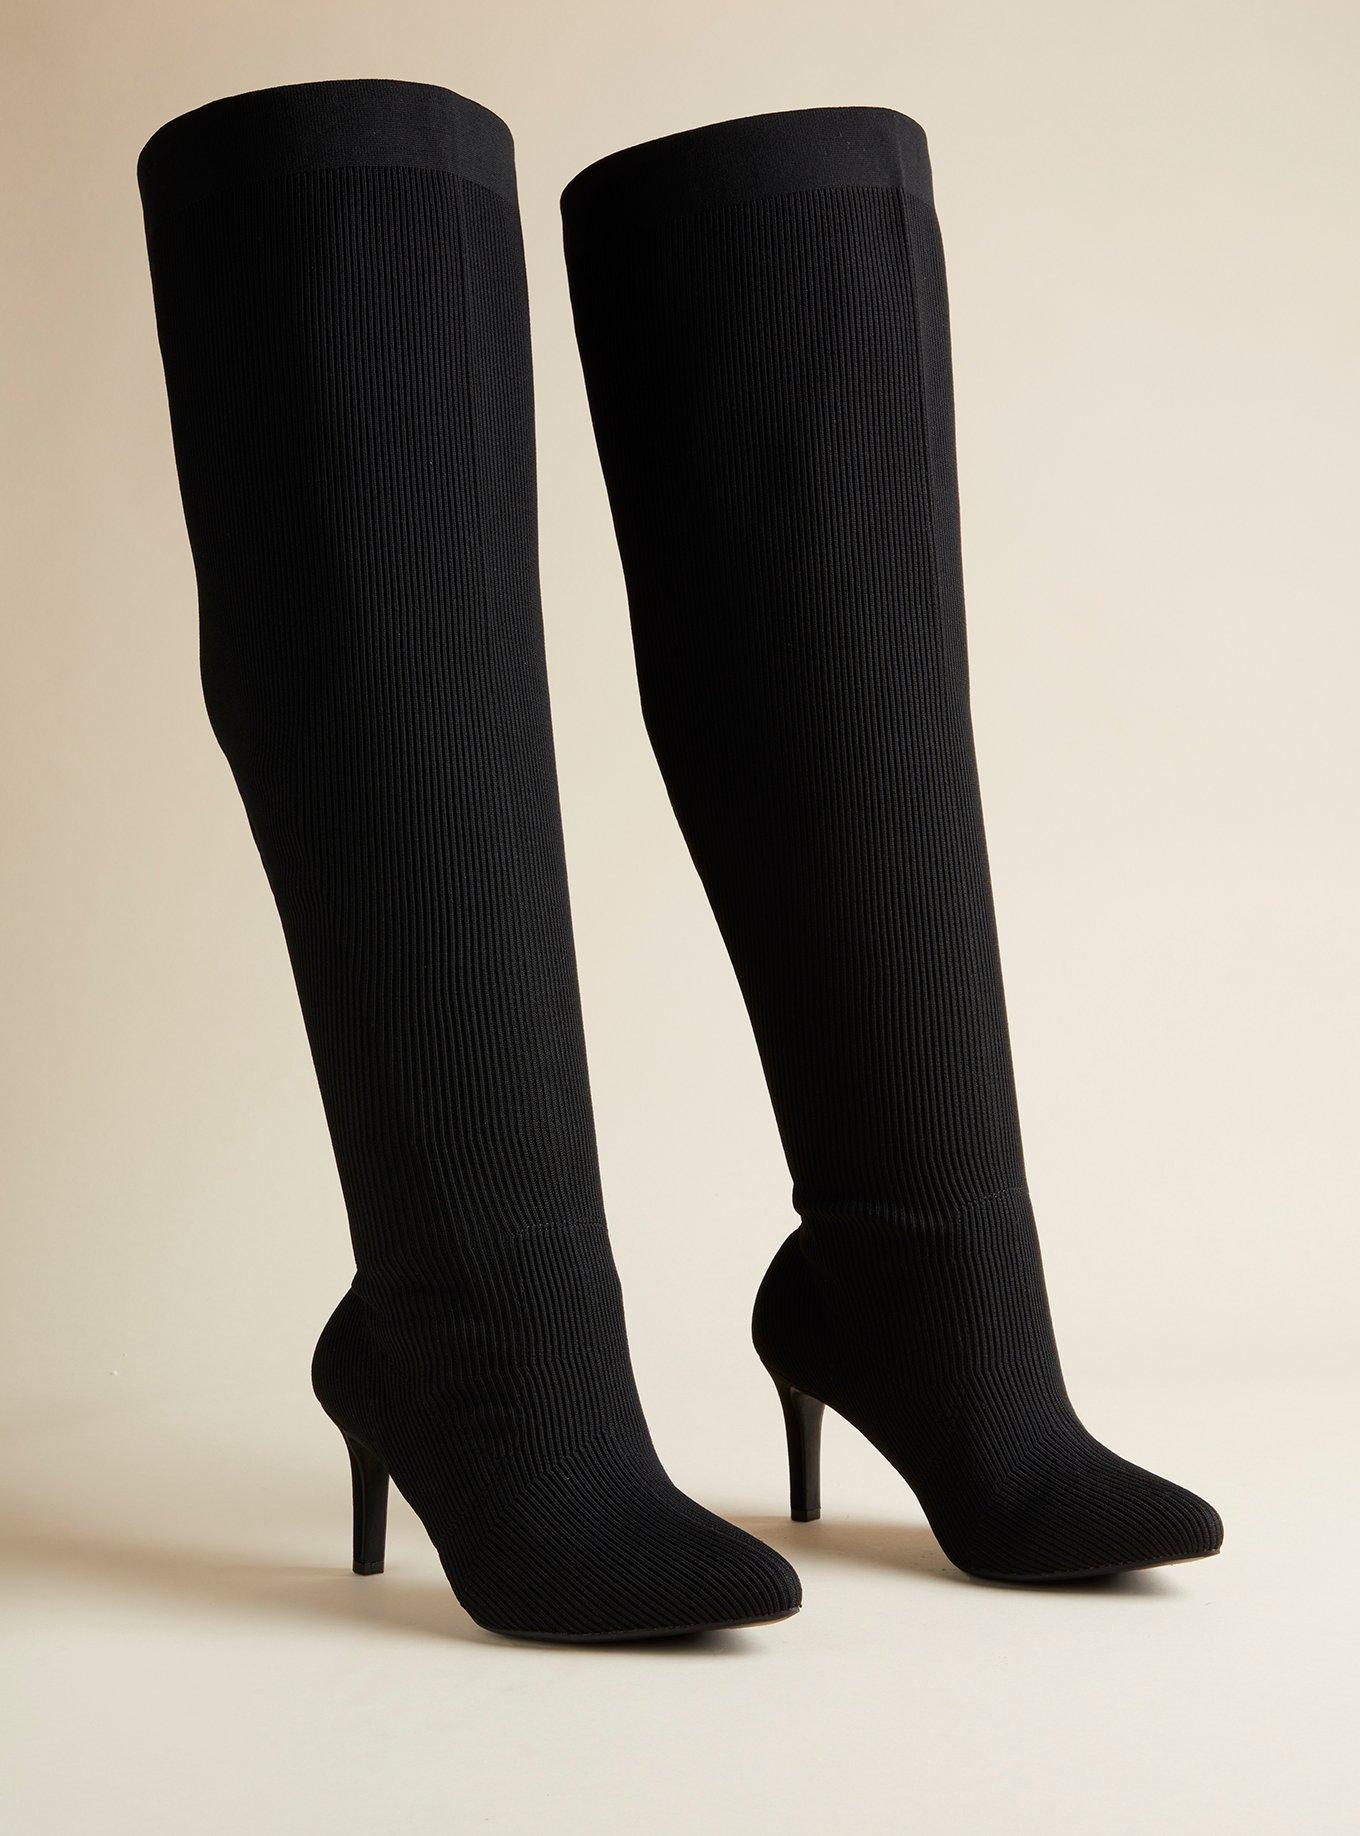 BLACK LEATHER 2.0 STILETTO HIGH-RIZE THIGH BOOTS